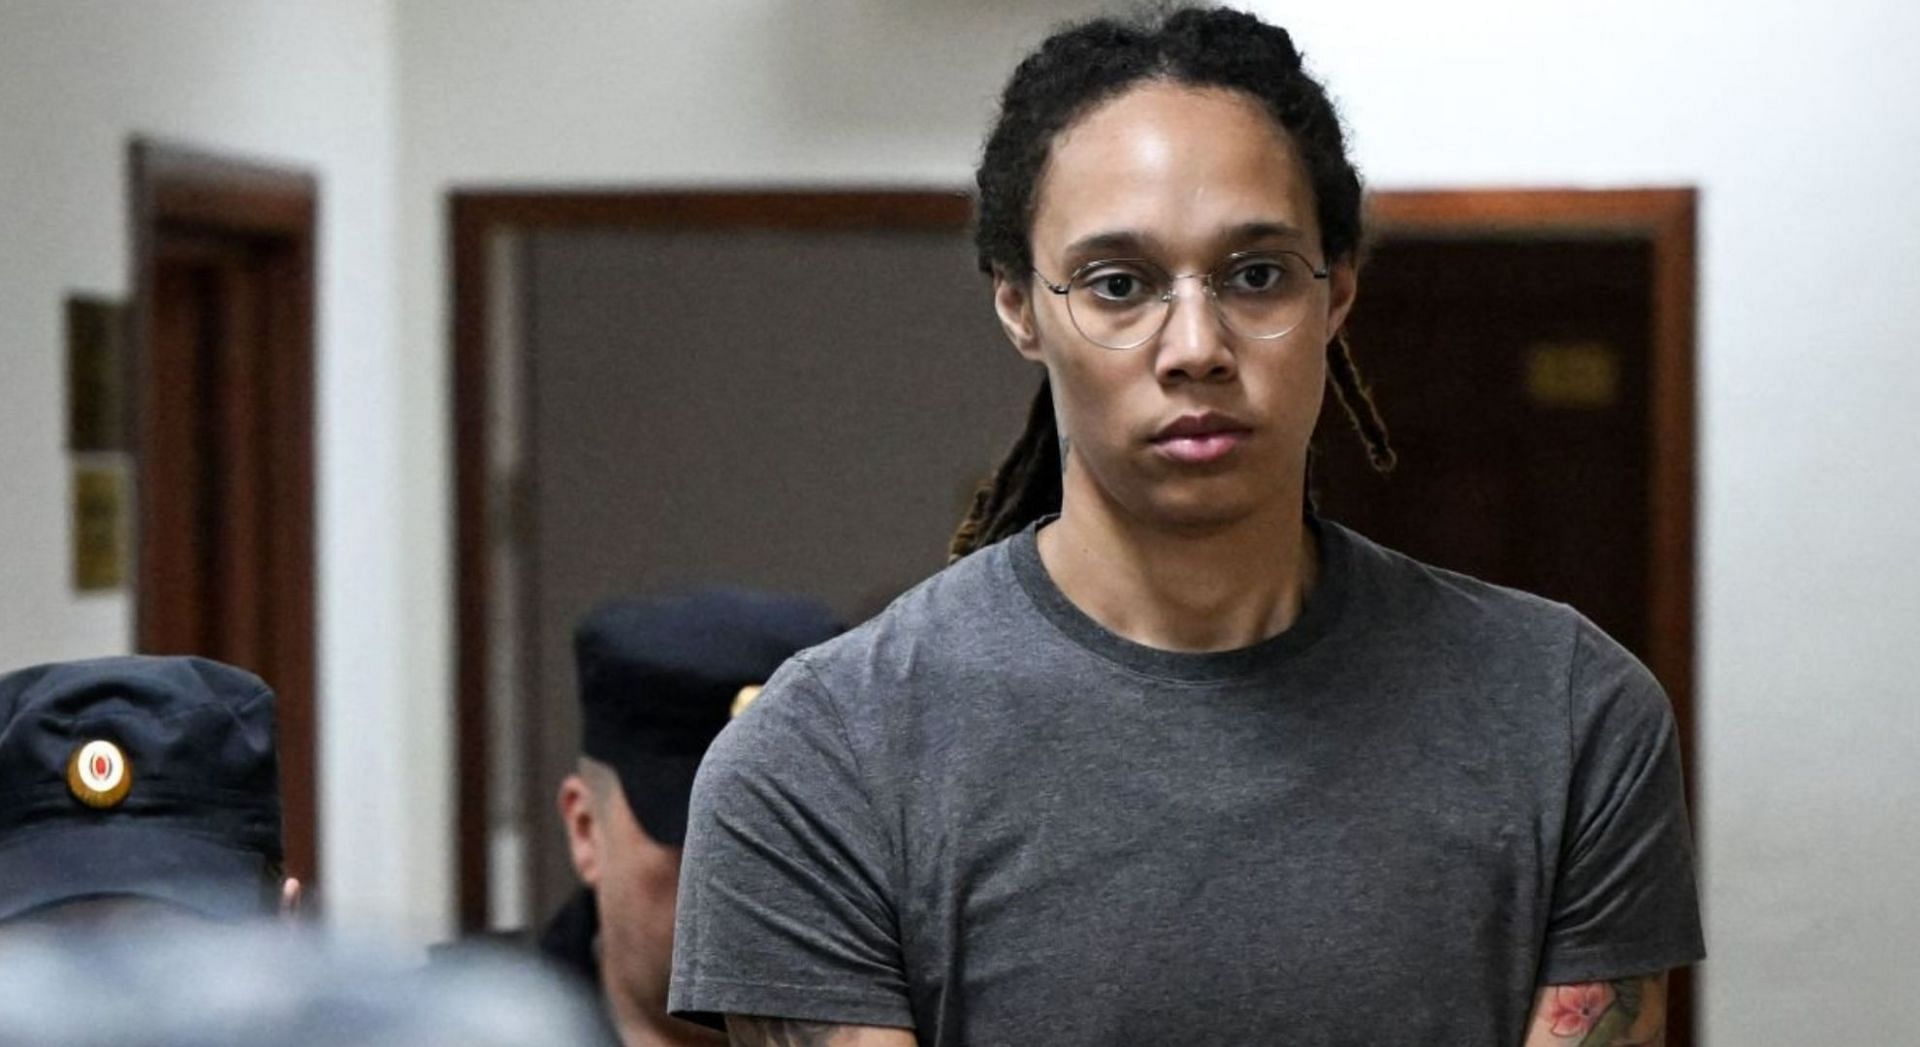 Brittney Griner has been sentenced to 10 years in Russian prison over drug charges (Image via Getty Images)